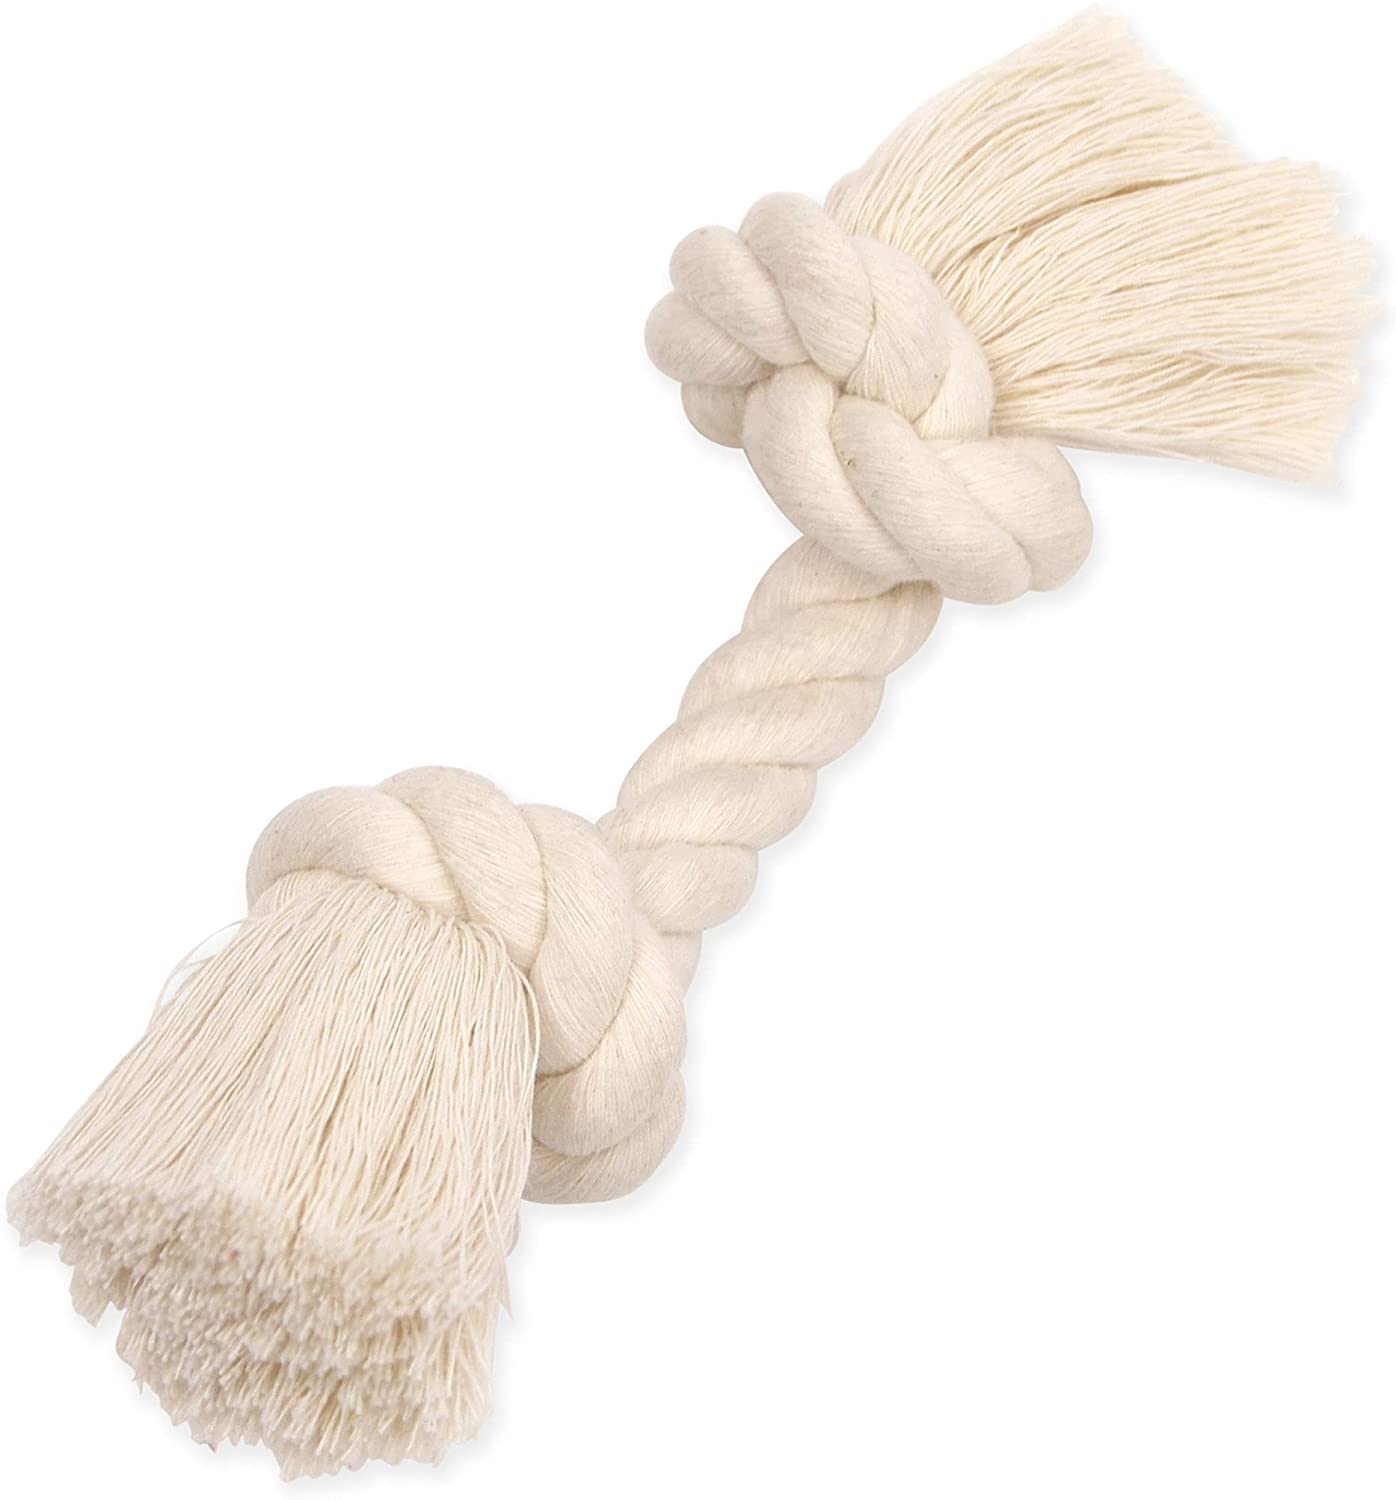 Mammoth Flossy Chews 2-Knot Rope Tug Dog Toy (6" Mini) $1 & More + Free Shipping w/ Prime or $25+